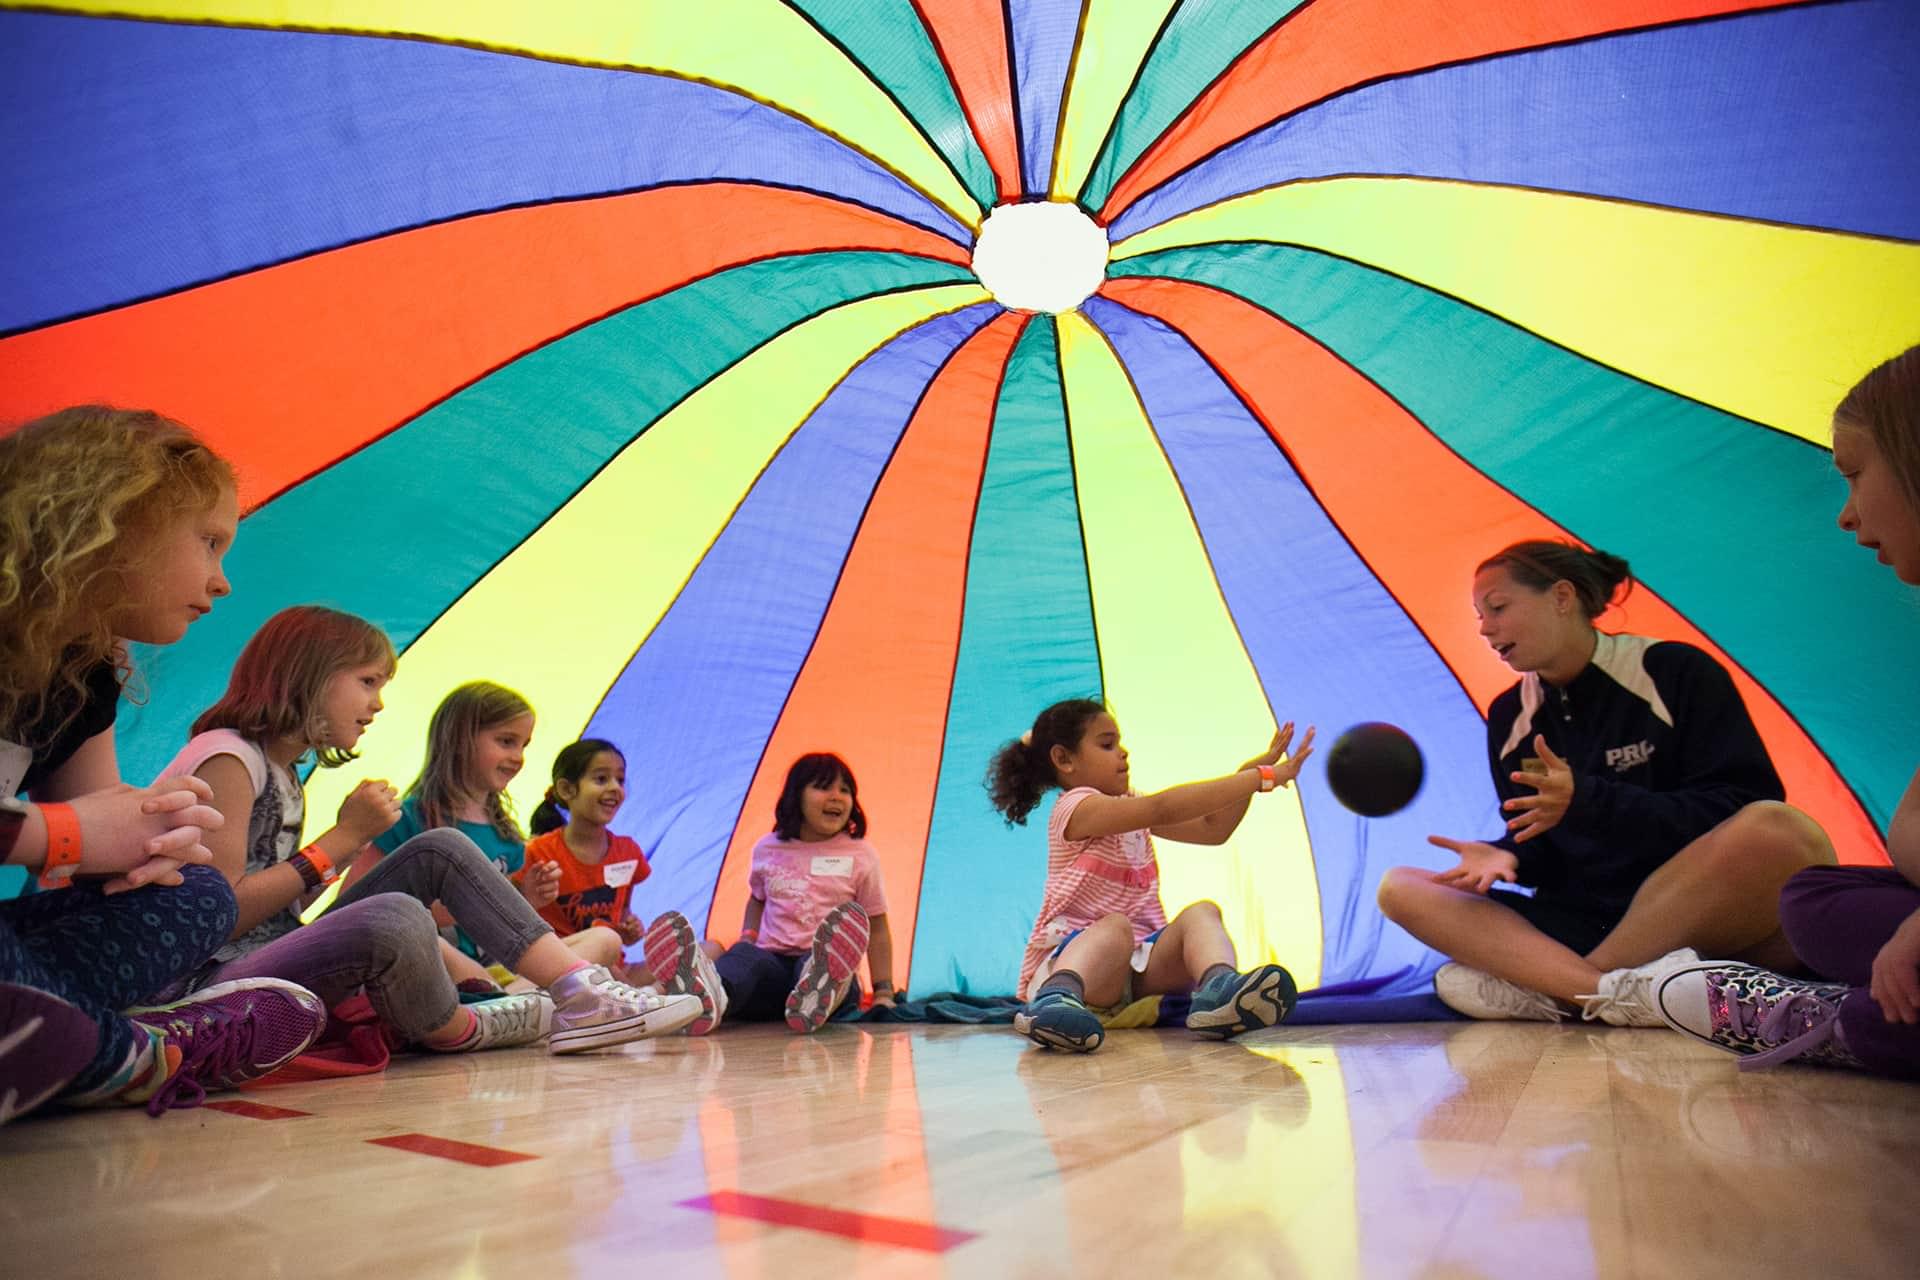 Groups of kids playing in a parachute